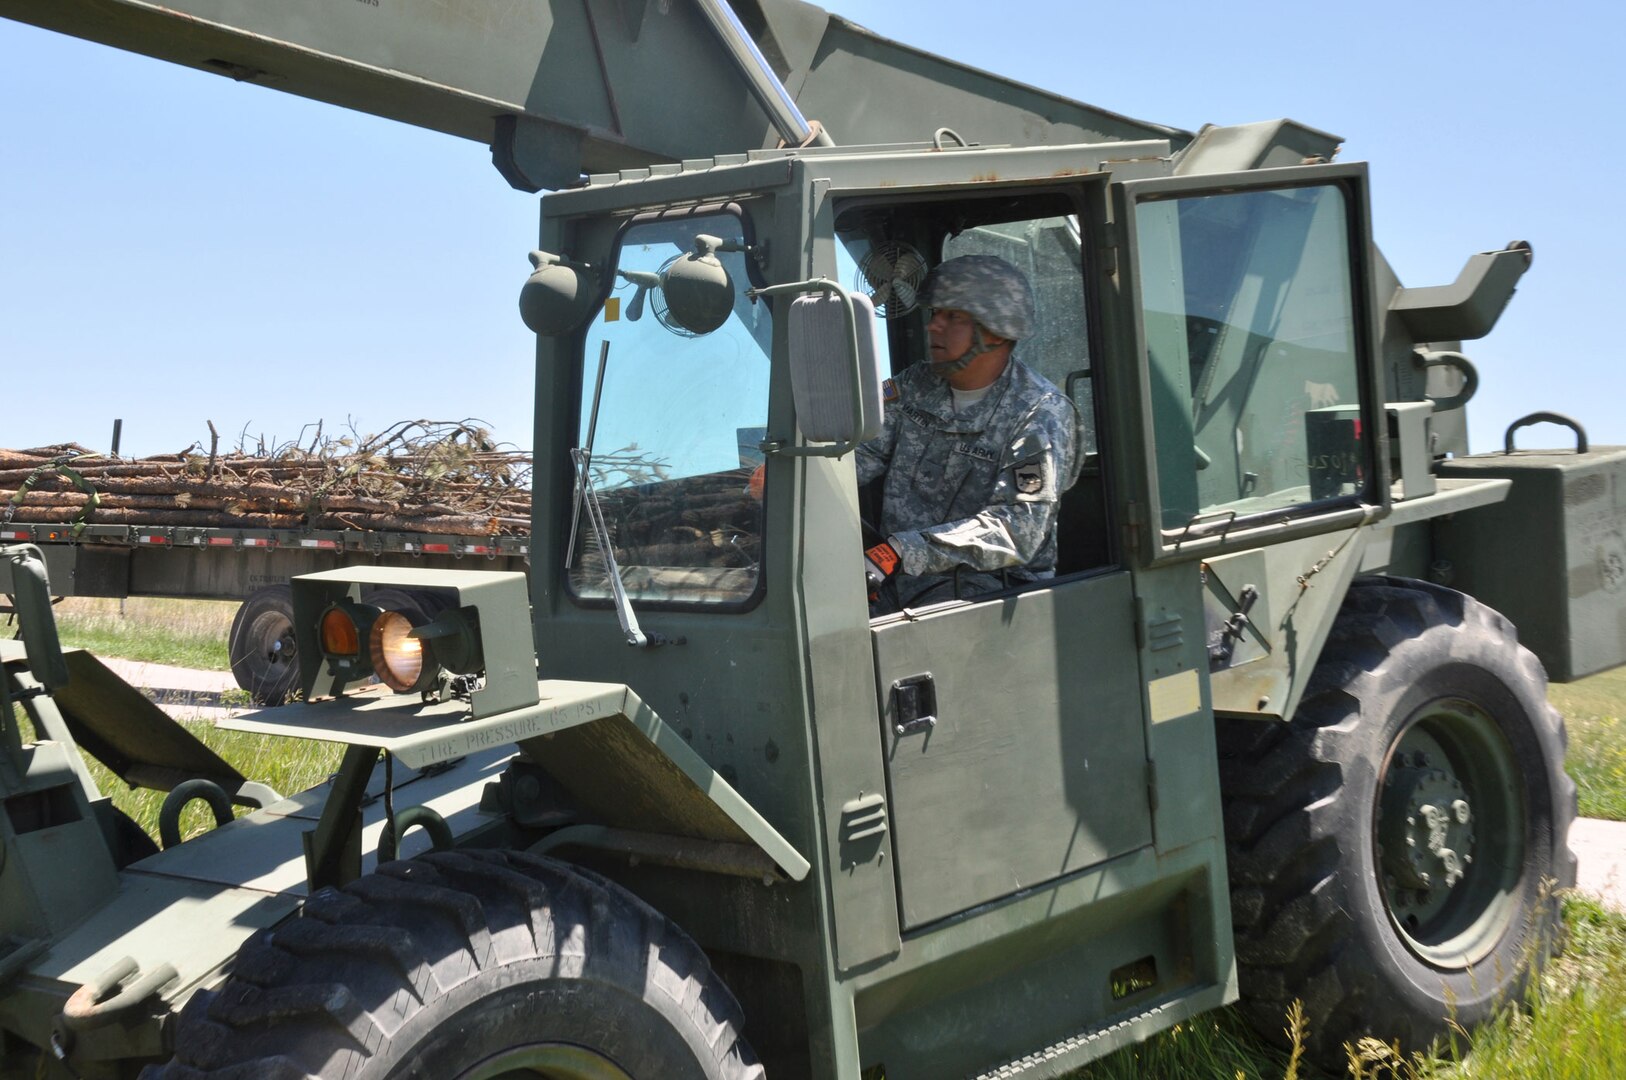 Sgt. Marcus Martin, a member of the 152nd Combat Sustainment Support Battalion operates a forklift while unloading timber from a flatbed trailer in his hometown of Wanblee, S.D., as part of a timber haul mission during exercise Golden Coyote, June 16, 2012. The mission delivered humanitarian aid in the form of timber to be used by his local Native American communities for heating and ceremonial purposes.